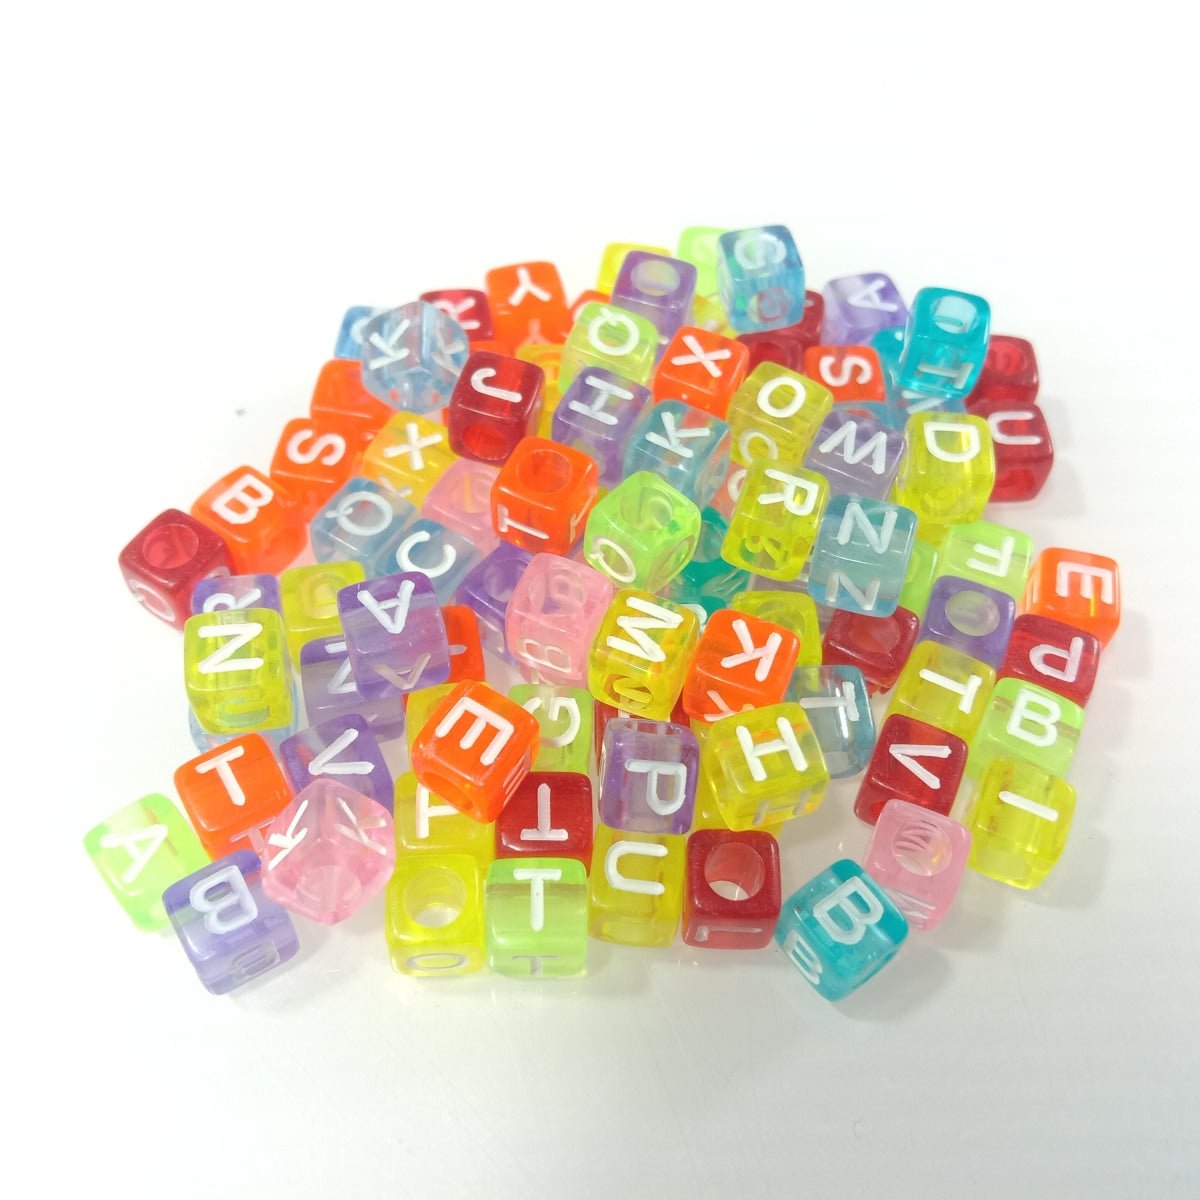 100pcs 6x6mm Square Beads Letters Alphabet Dice DIY Jewellery Making Moon Love Heart Cloud Star - White on Multicoloured - - Asia Sell